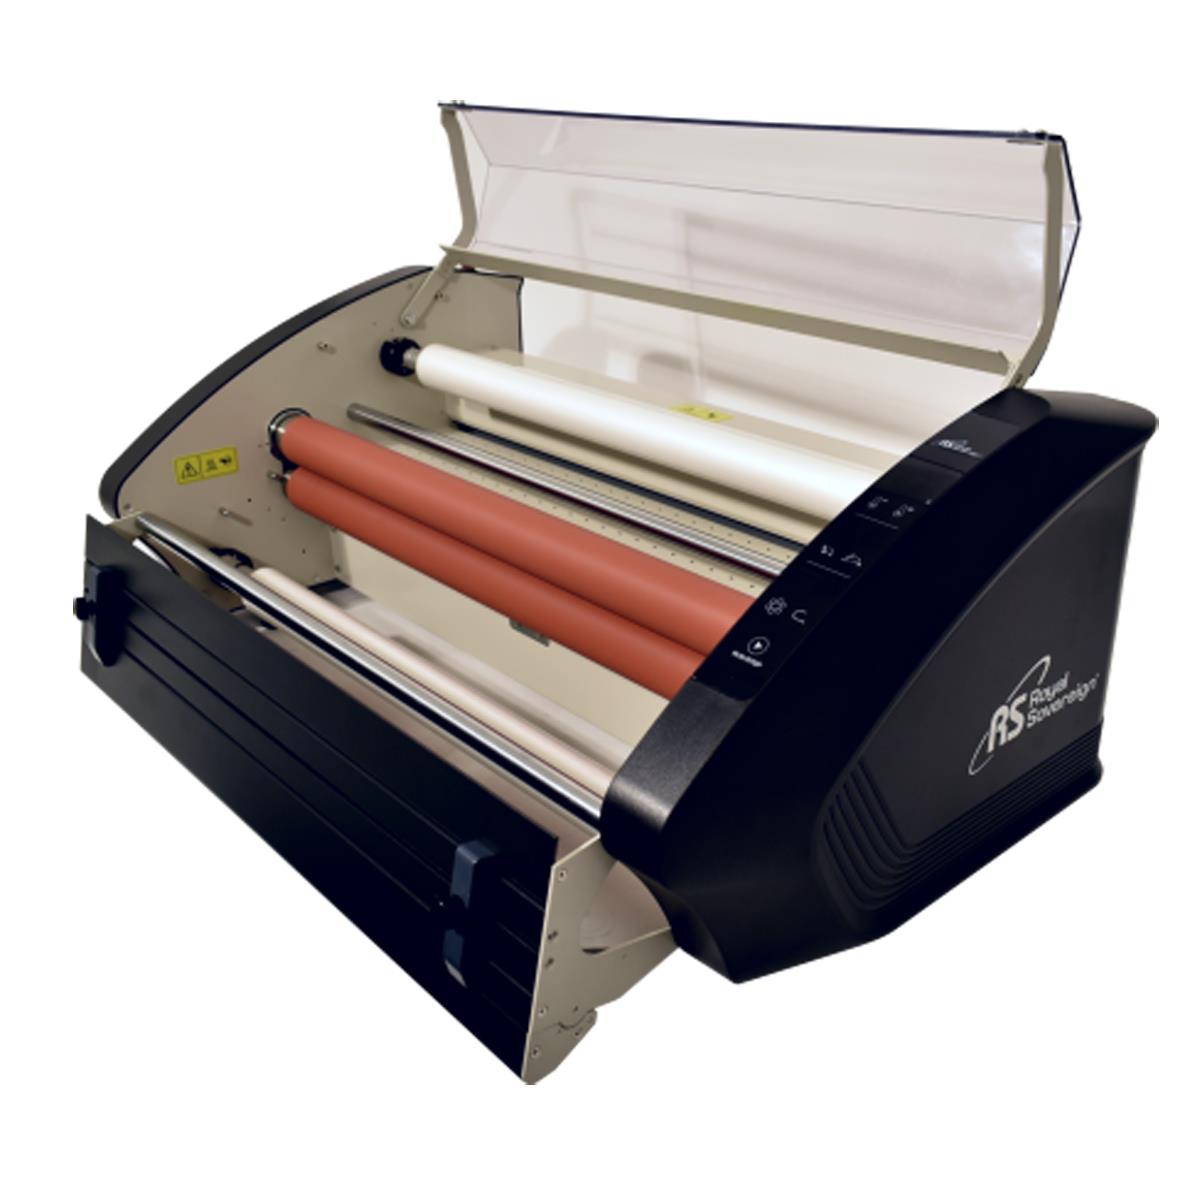 

Royal Sovereign Alexis 27 Professional 27" Tabletop Roll Laminator